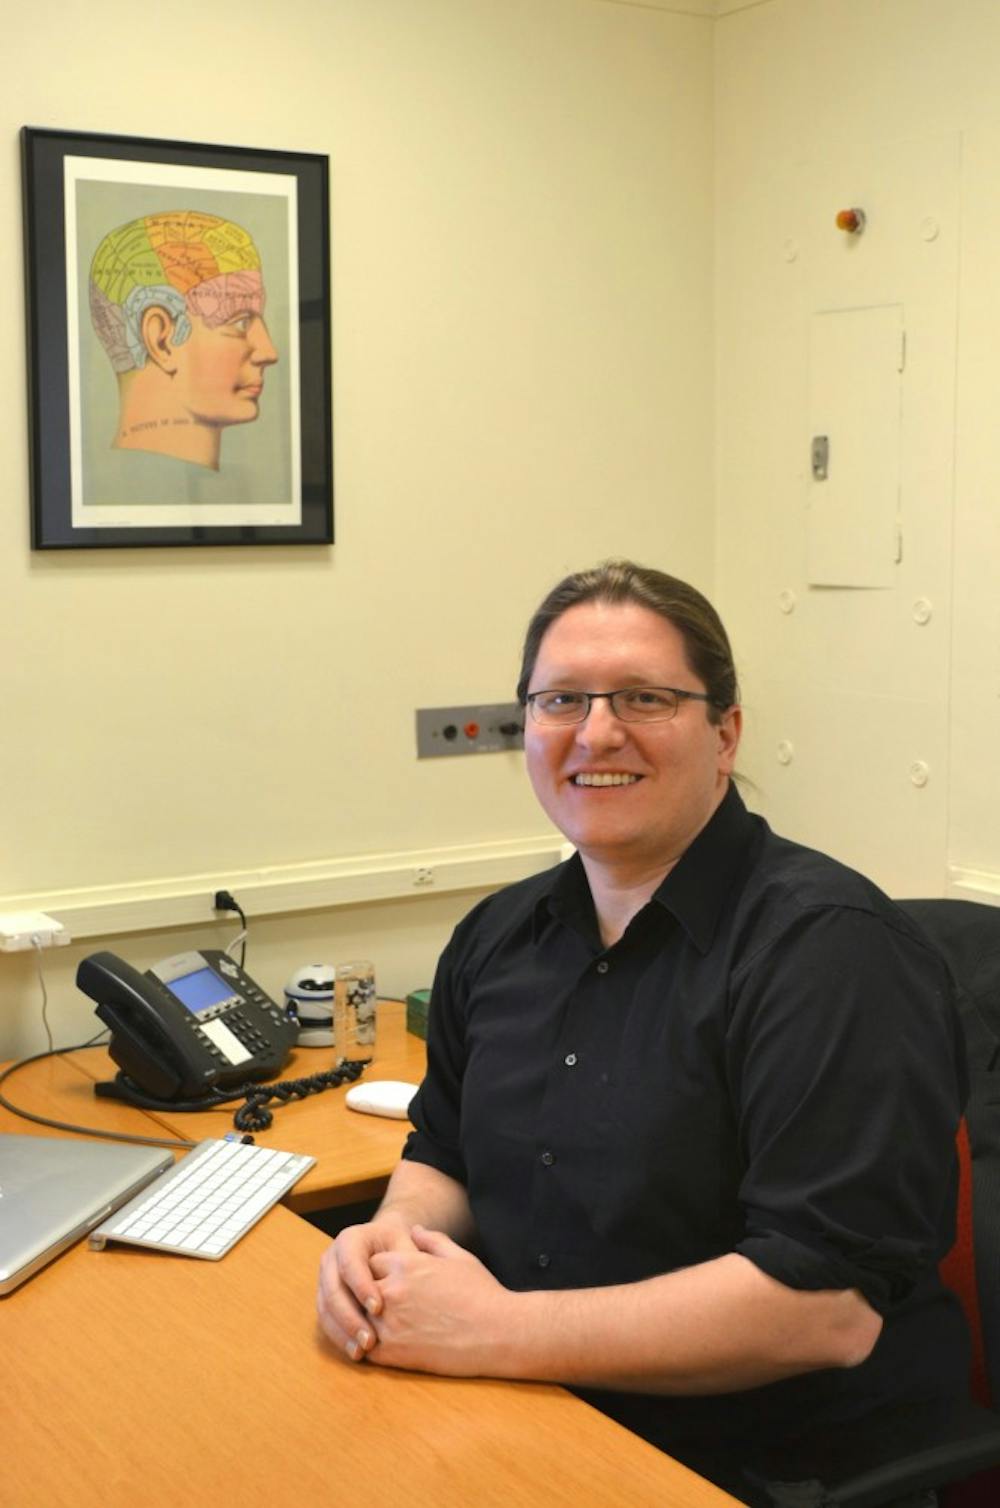 Profile on Prof. Joe Kable in his office